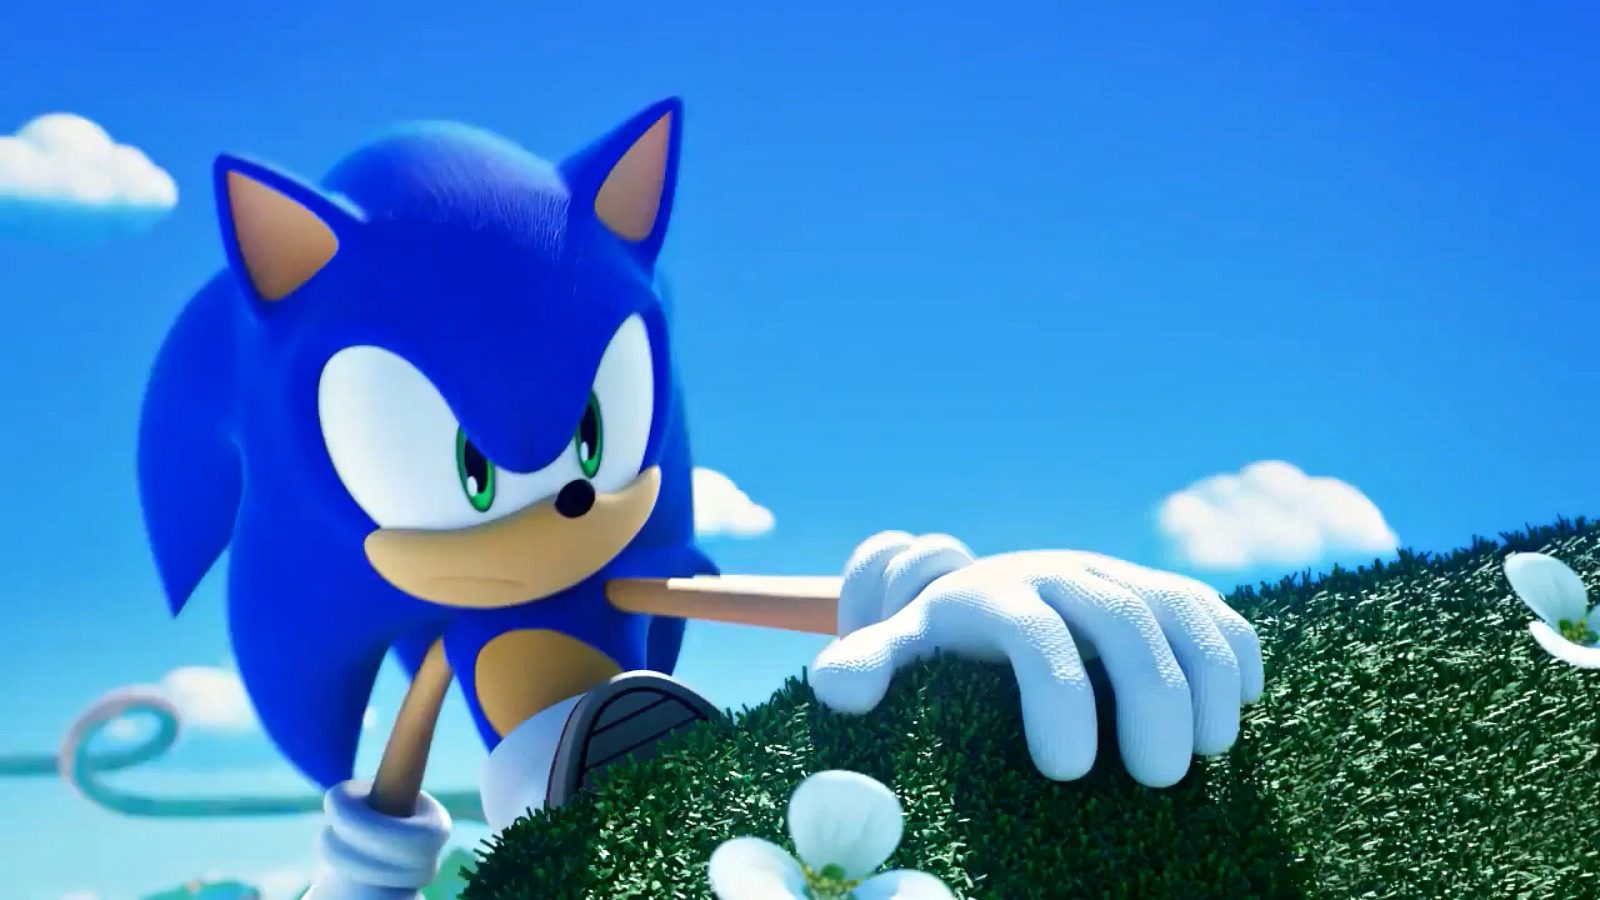 Paramount Moving Ahead with CGI/Live Action Sonic the Hedgehog Movie